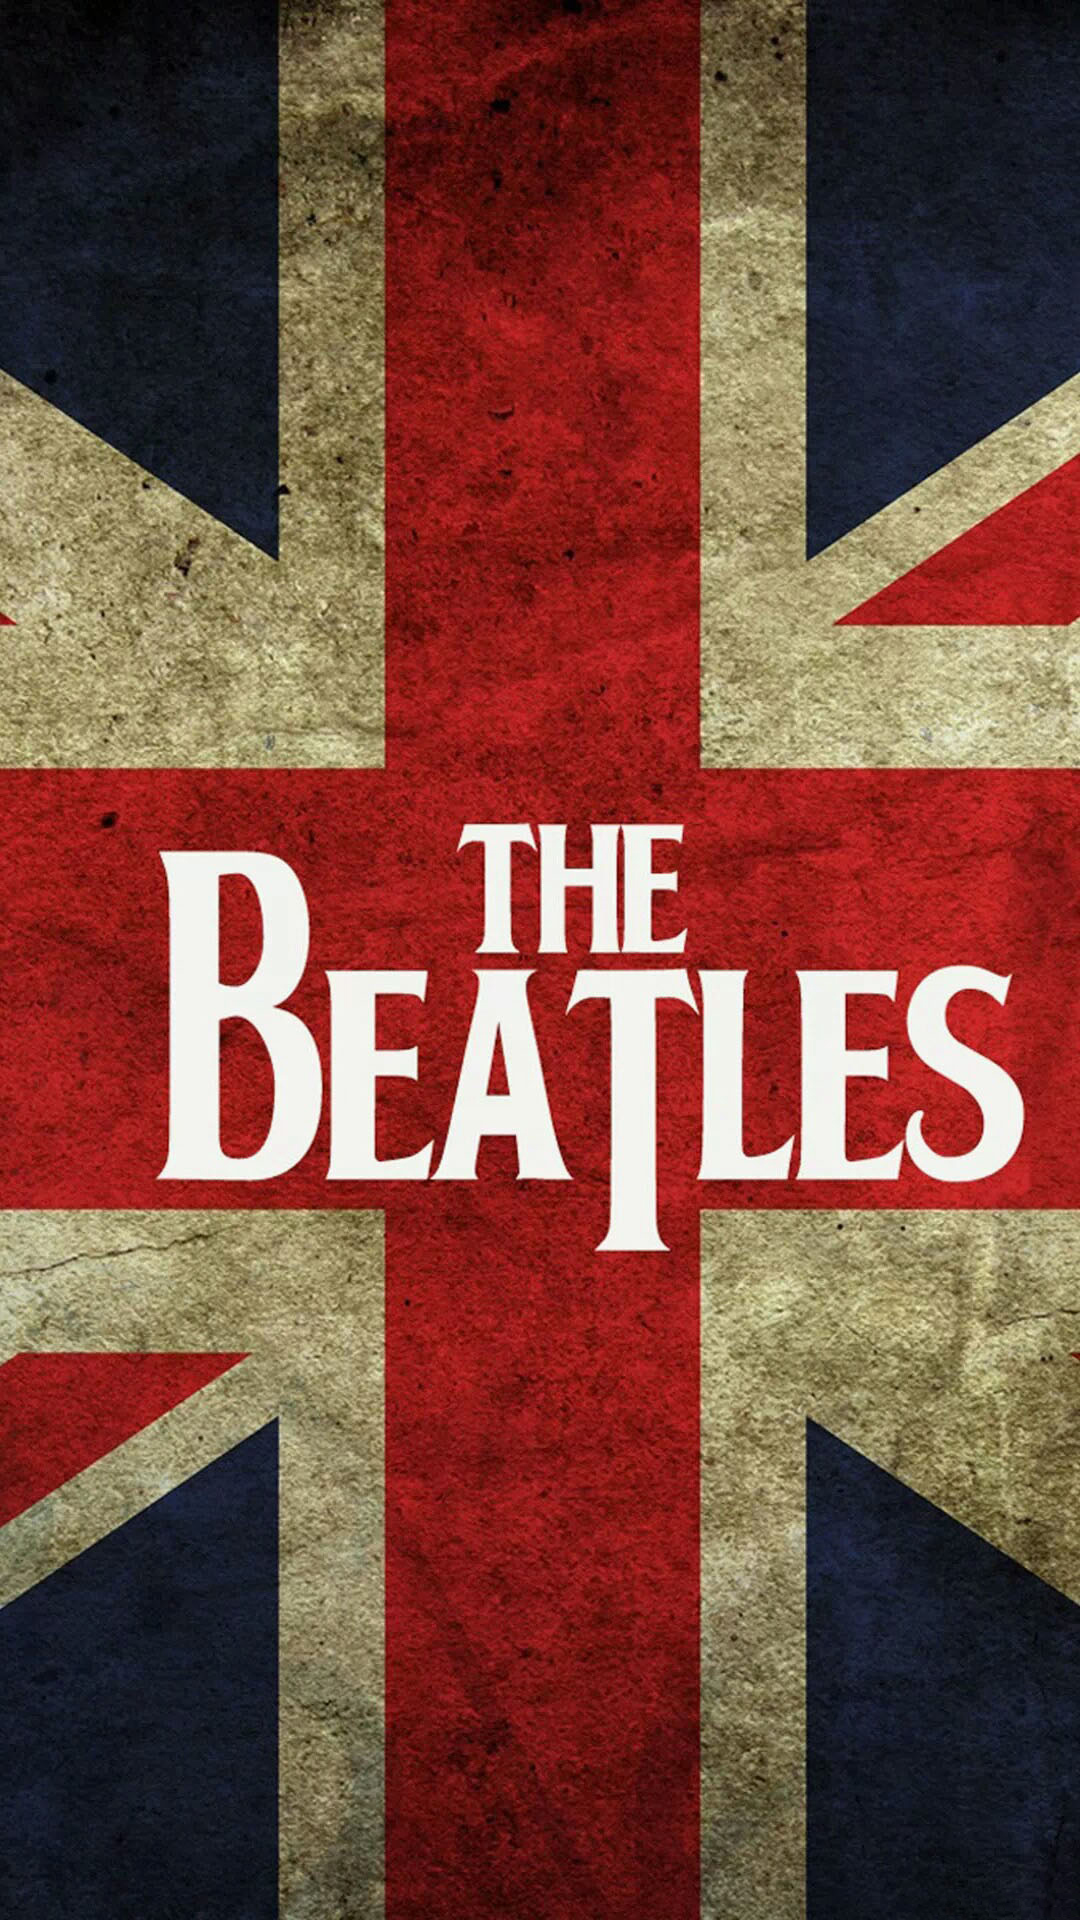 The Beatles UK Flag Android Wallpaper free download